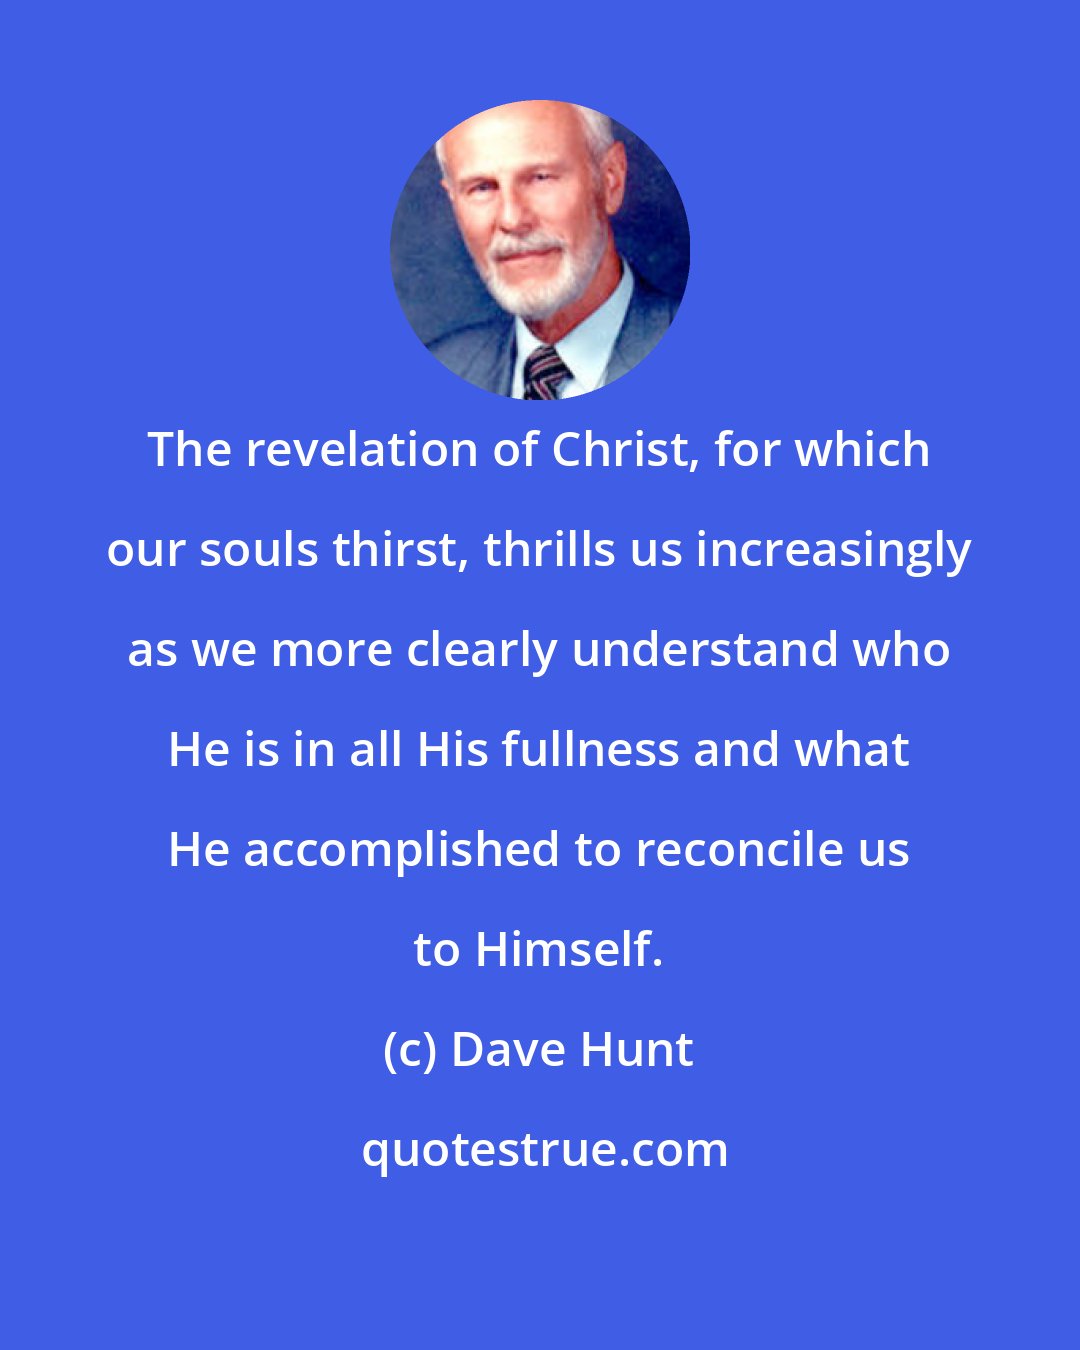 Dave Hunt: The revelation of Christ, for which our souls thirst, thrills us increasingly as we more clearly understand who He is in all His fullness and what He accomplished to reconcile us to Himself.